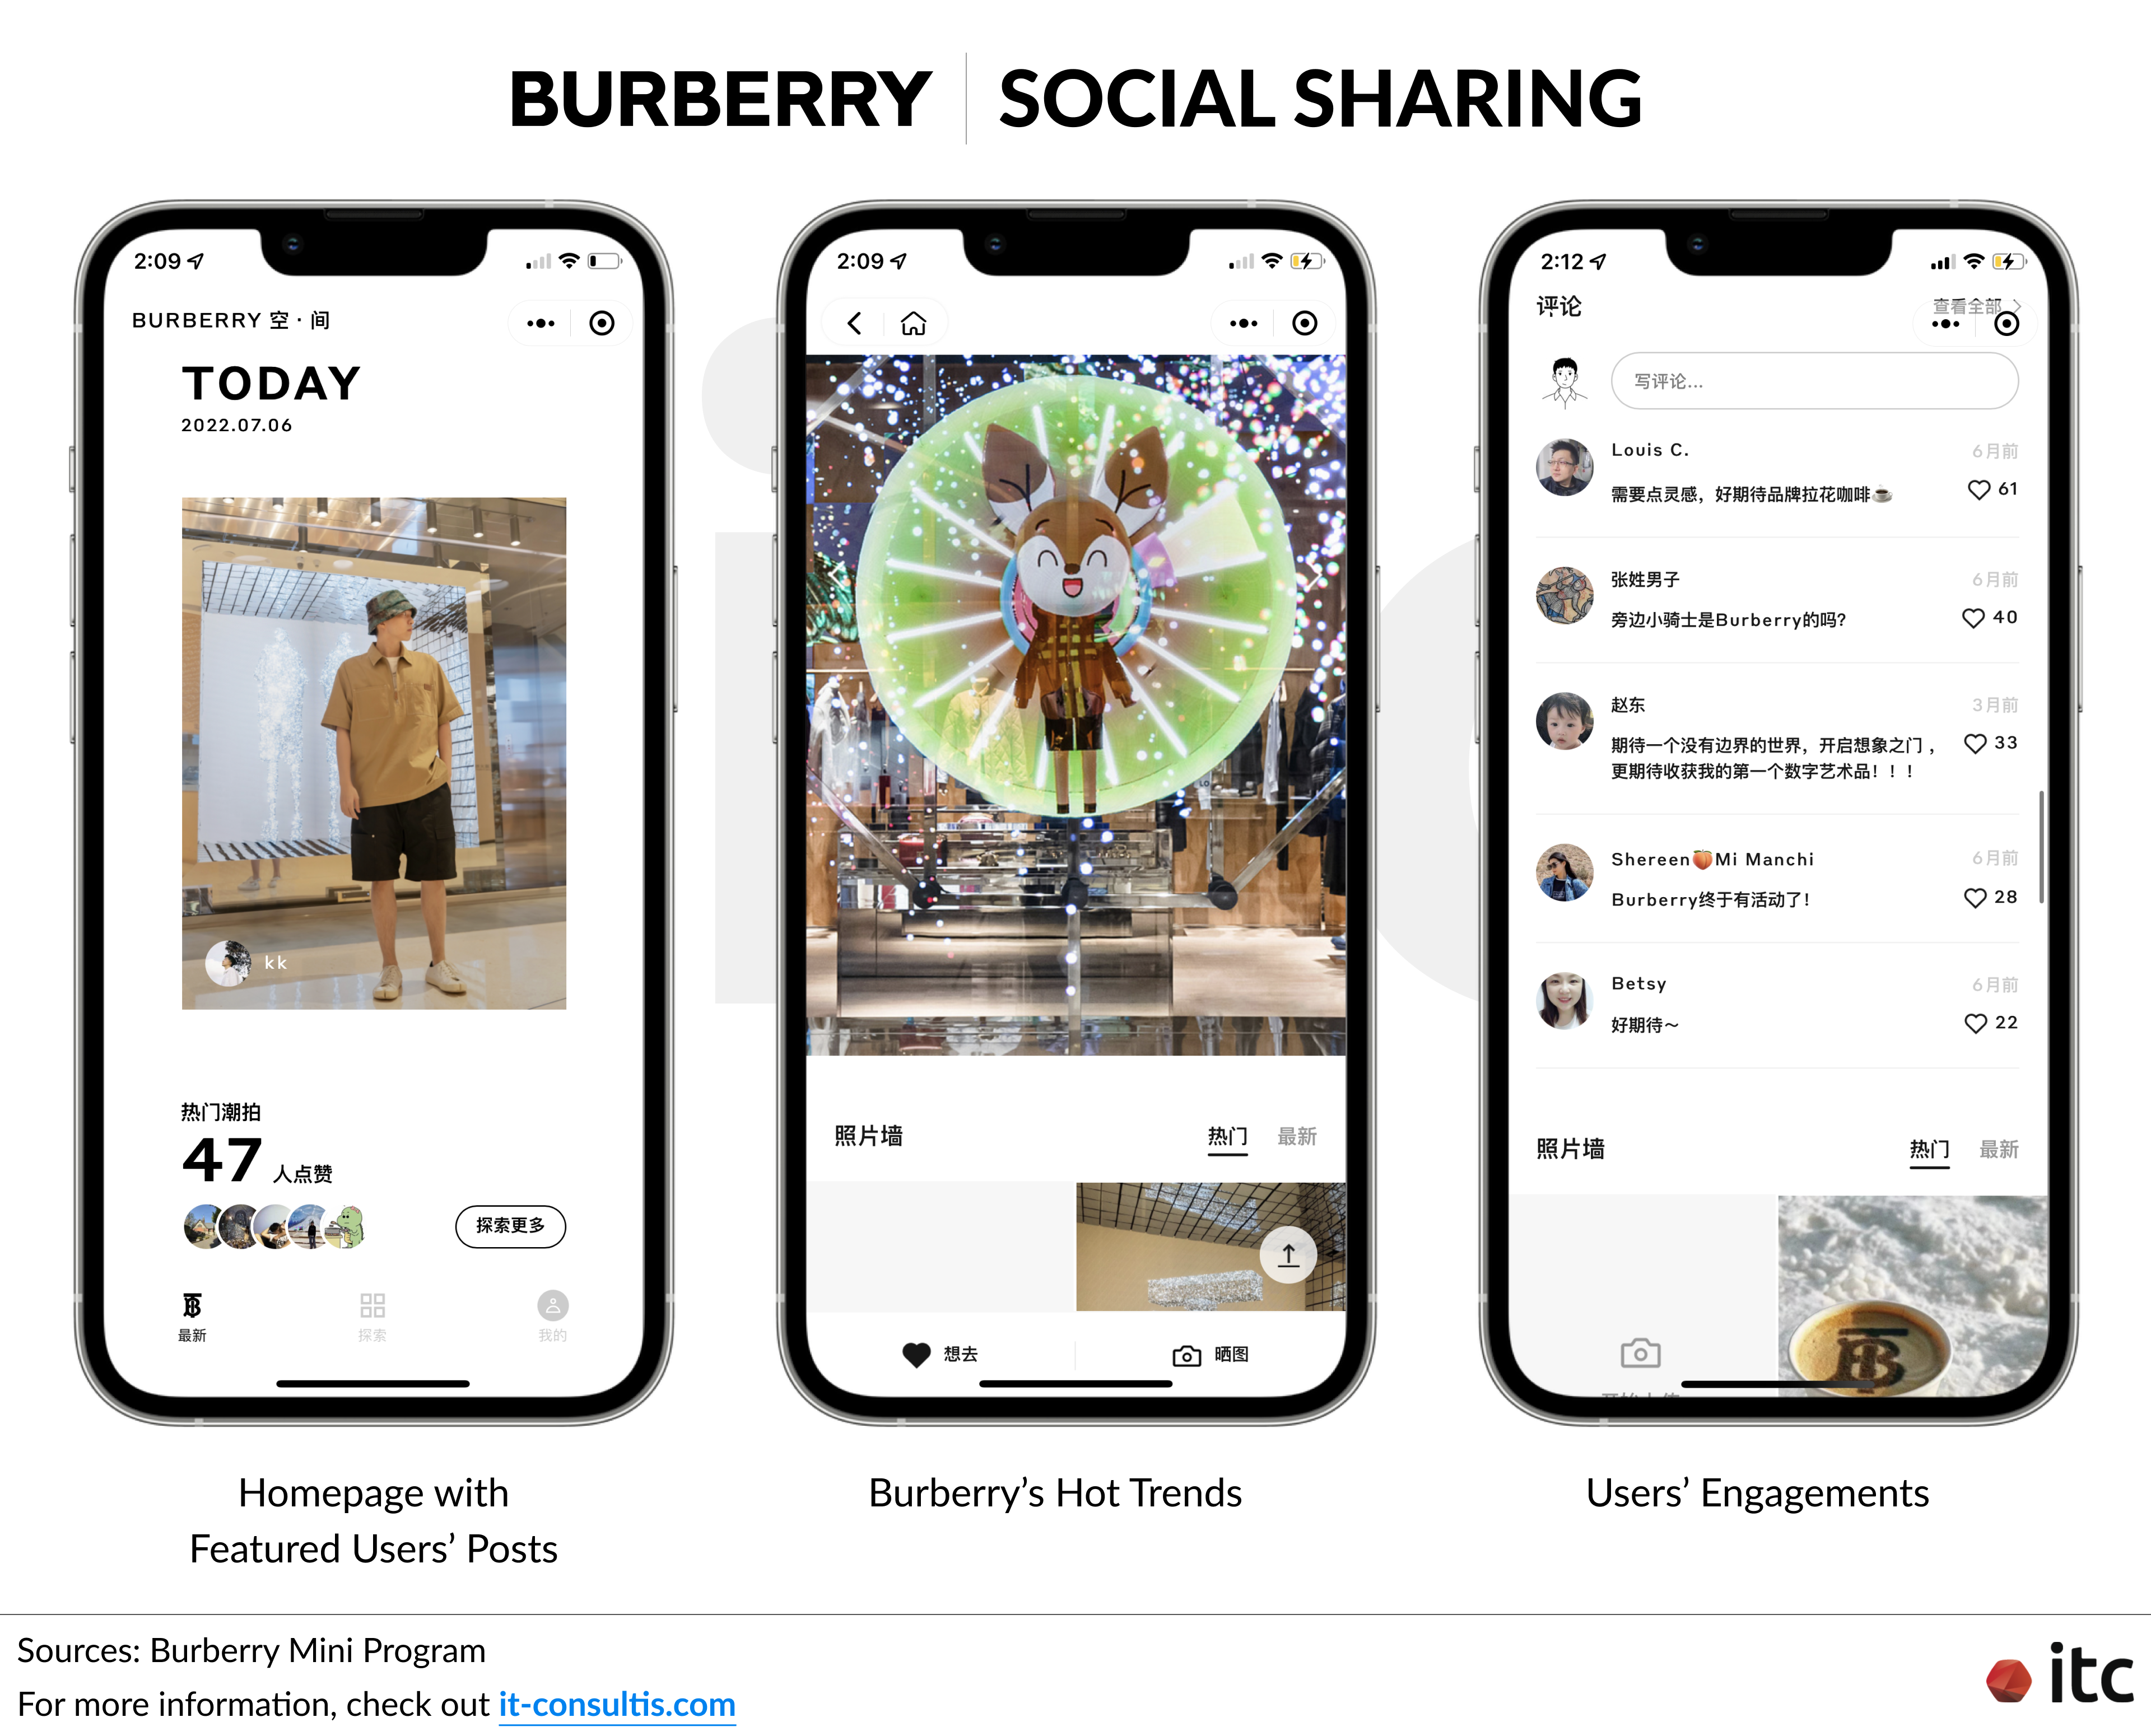 Burberry's luxury loyalty WeChat Mini Program encourages social sharing to build a digital community for the brand right on WeChat